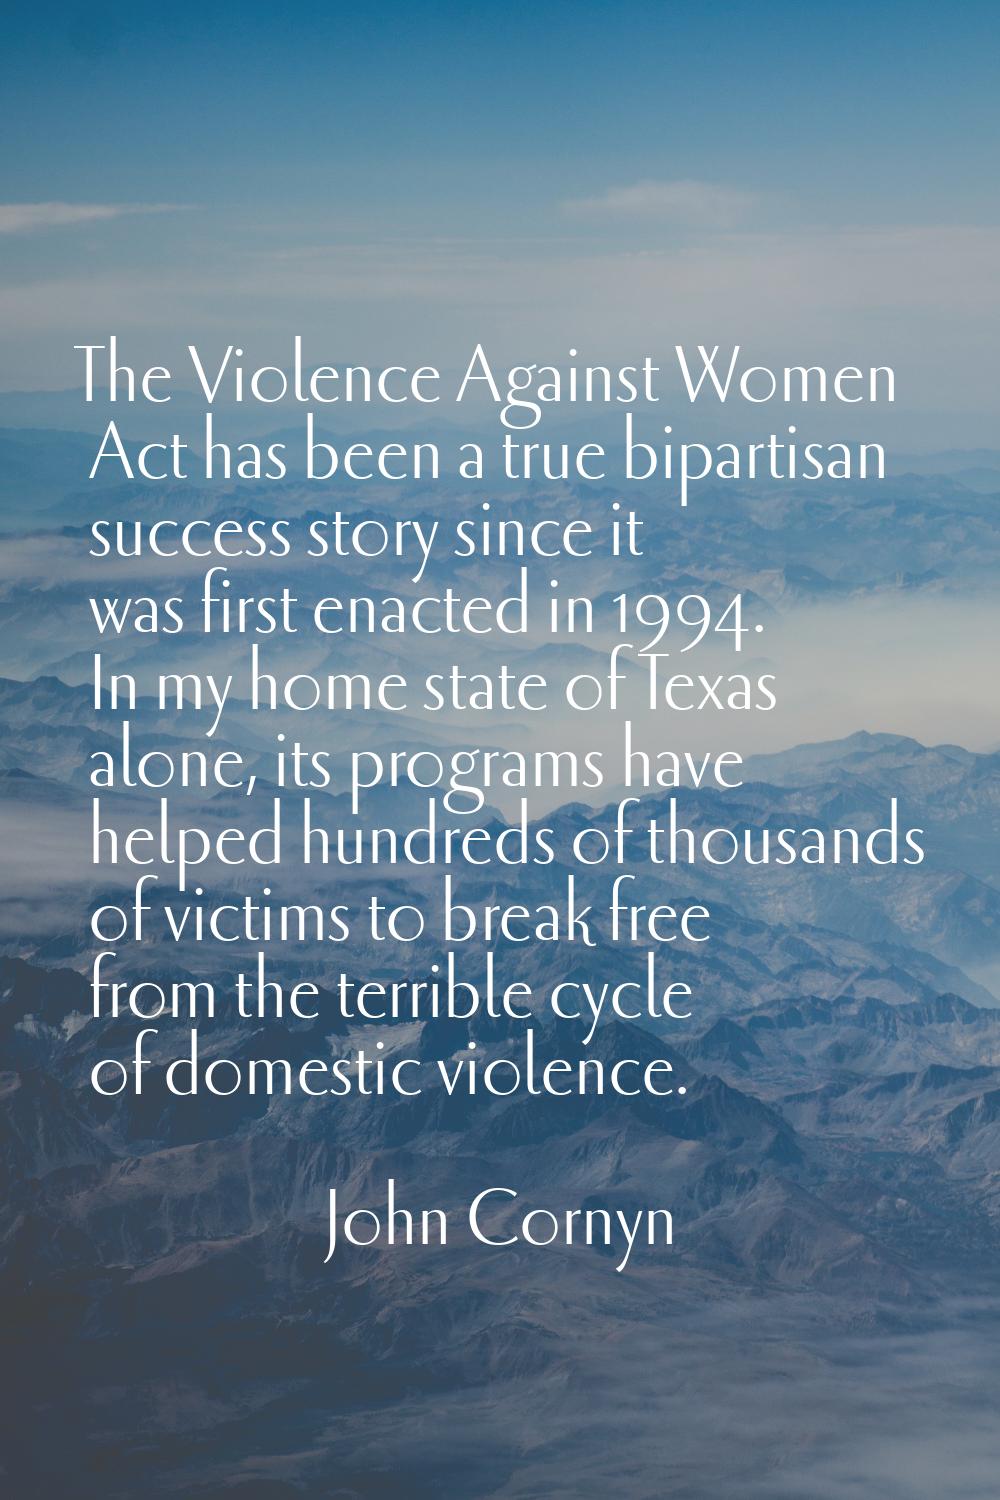 The Violence Against Women Act has been a true bipartisan success story since it was first enacted 